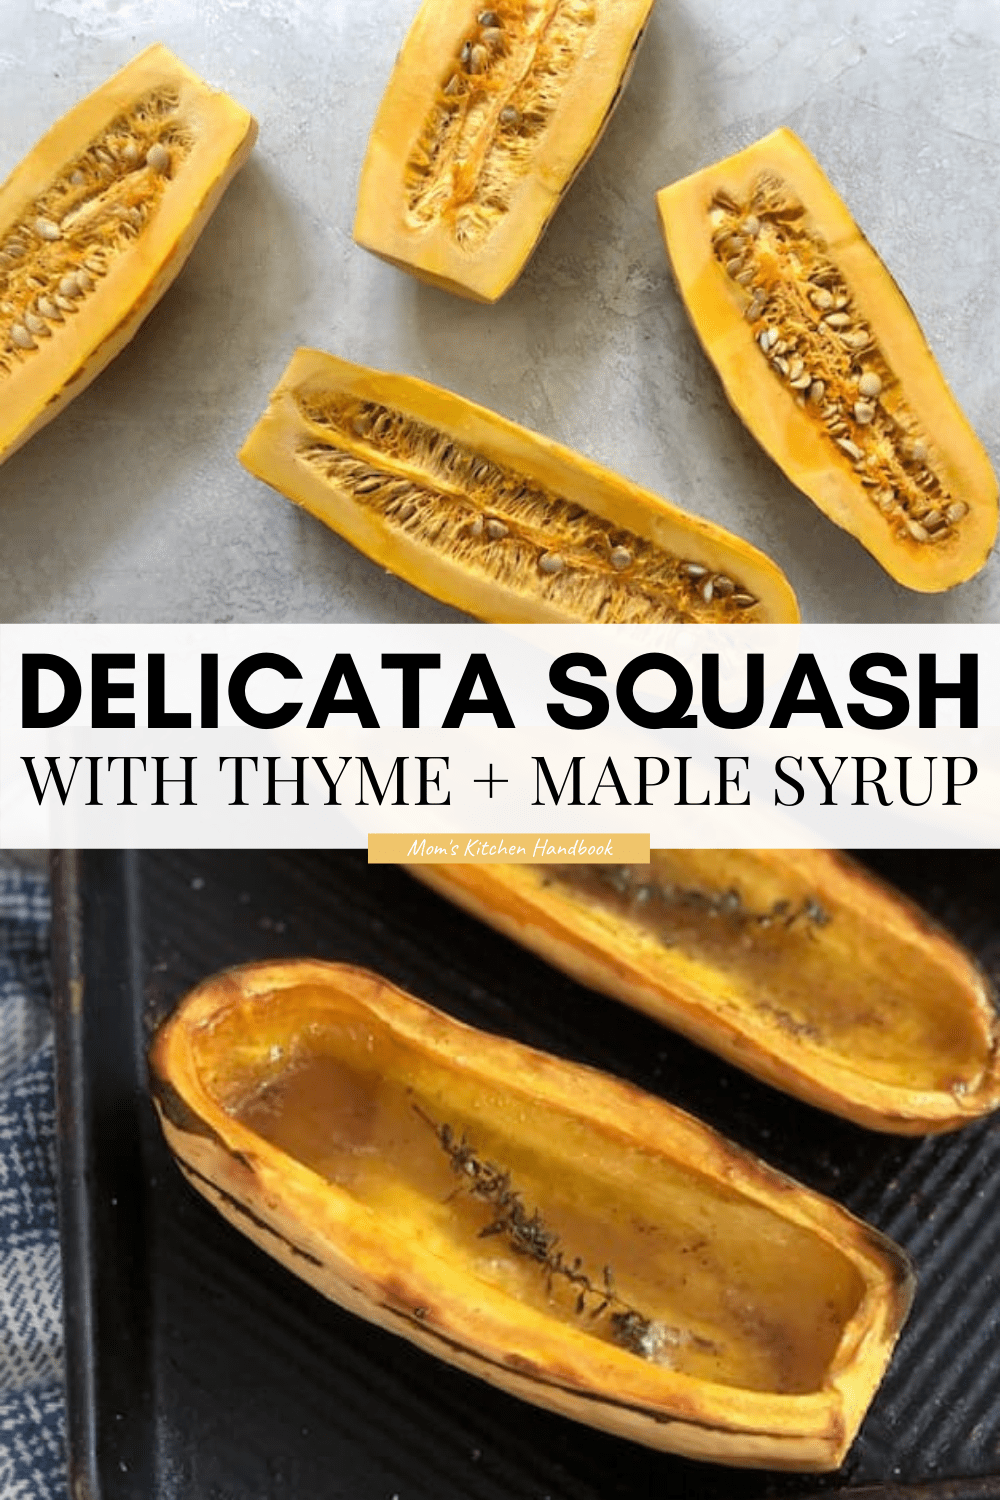 Roasted Delicata Squash with Maple Syrup